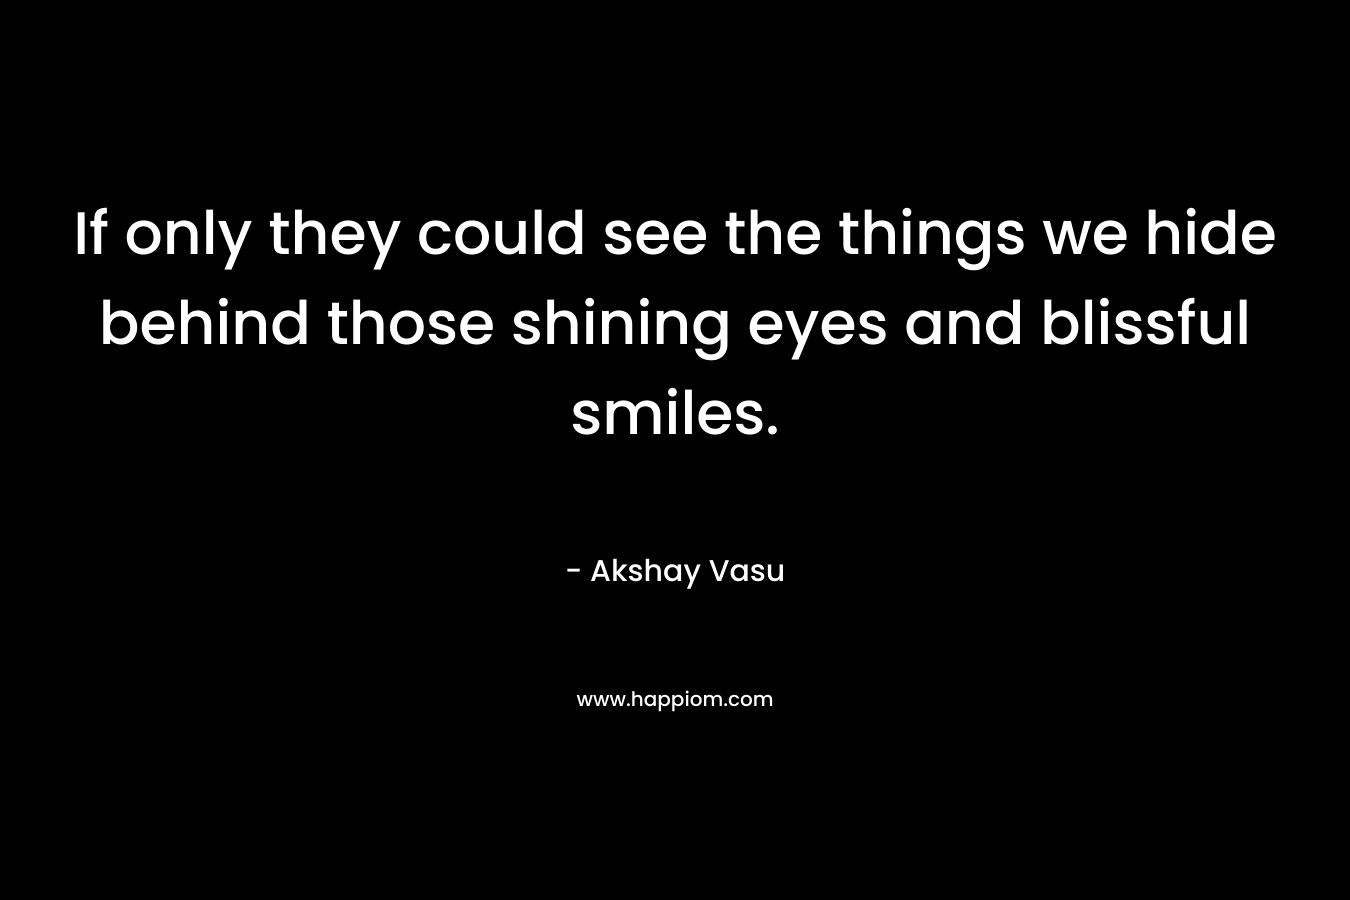 If only they could see the things we hide behind those shining eyes and blissful smiles.